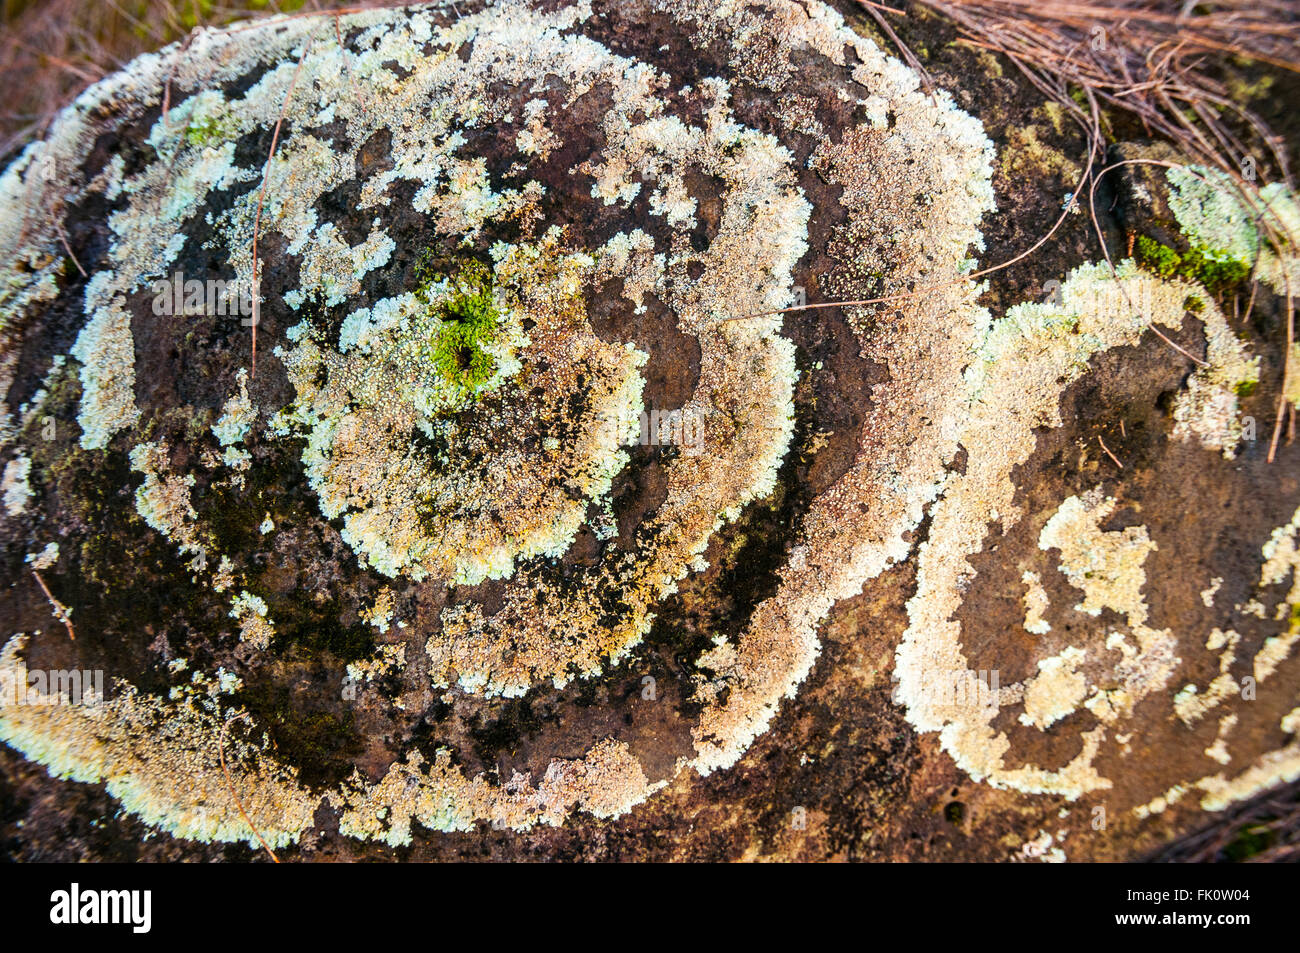 Rings of lichens growing on a large stone form concentric circles. Kauai, Hawaii, United States. Stock Photo